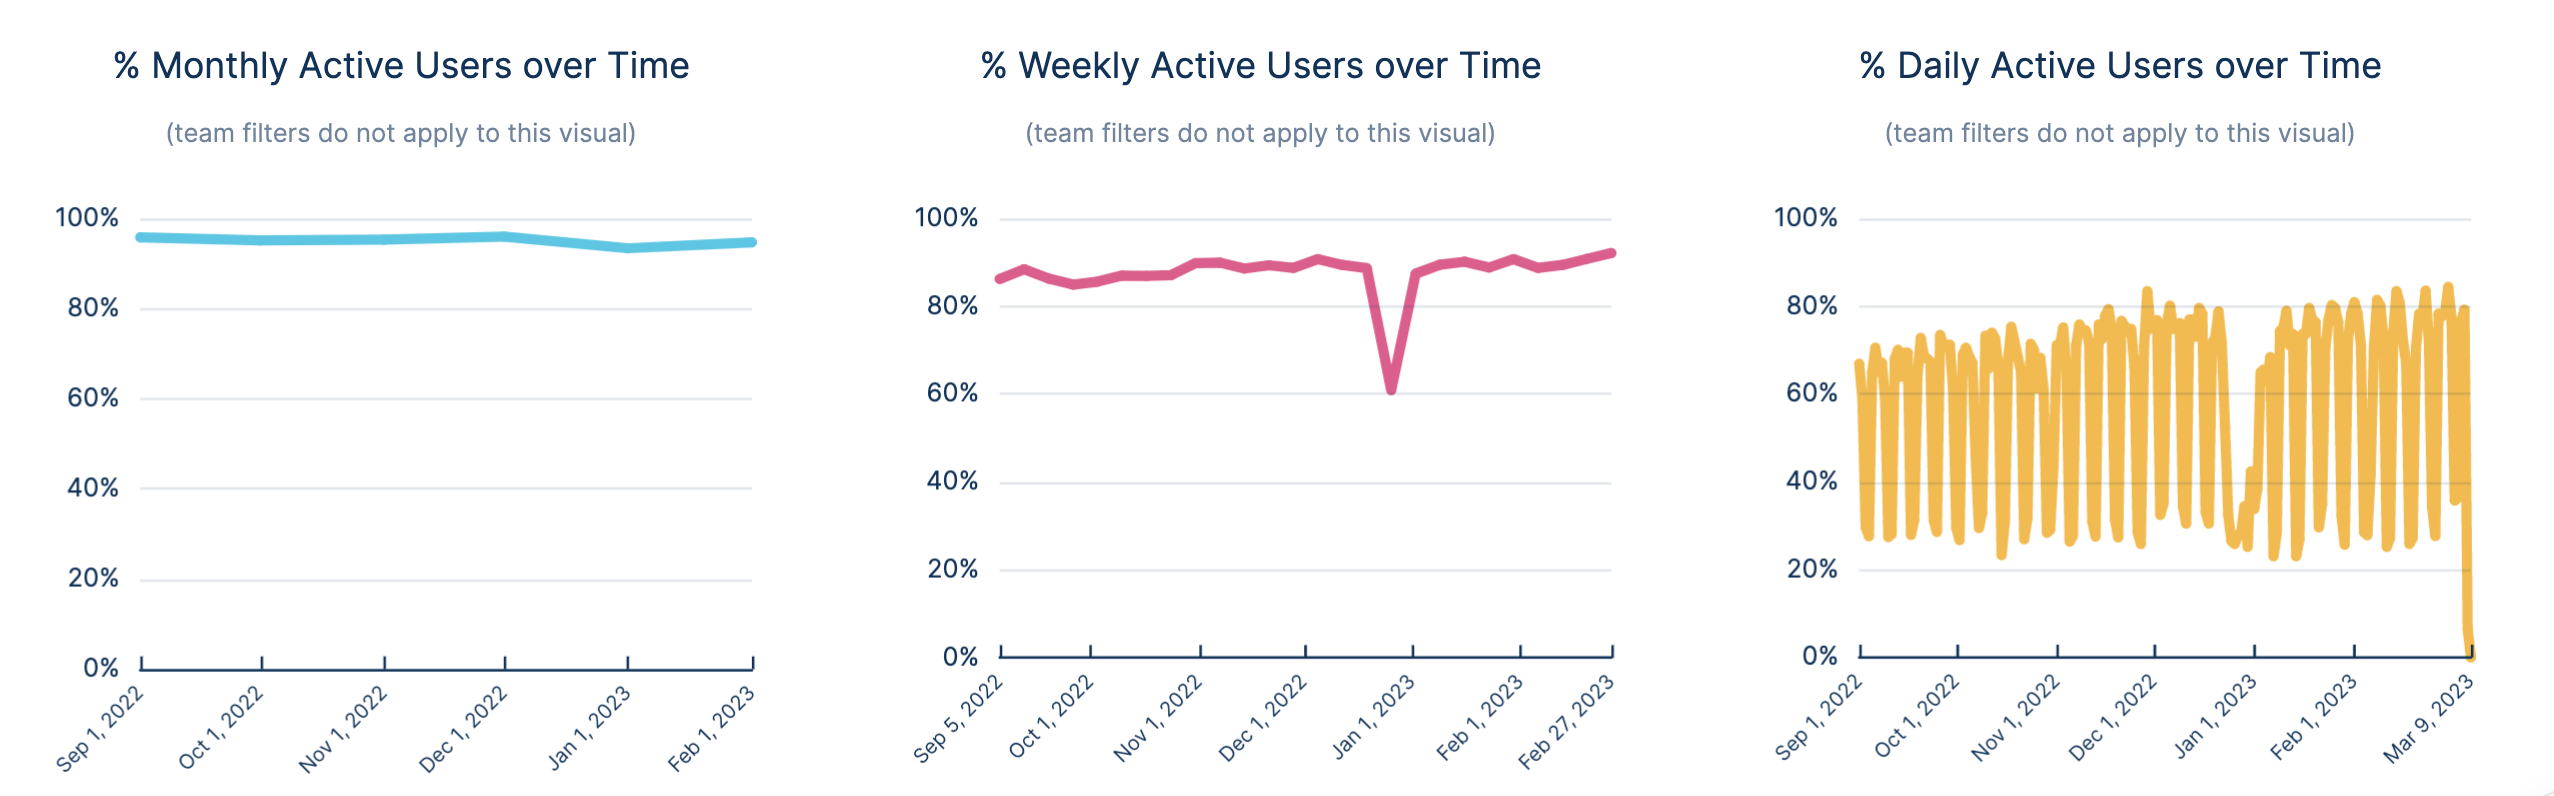 UA-Percentage_of_Monthly__Weekly__Daily_active_users_over_time.png